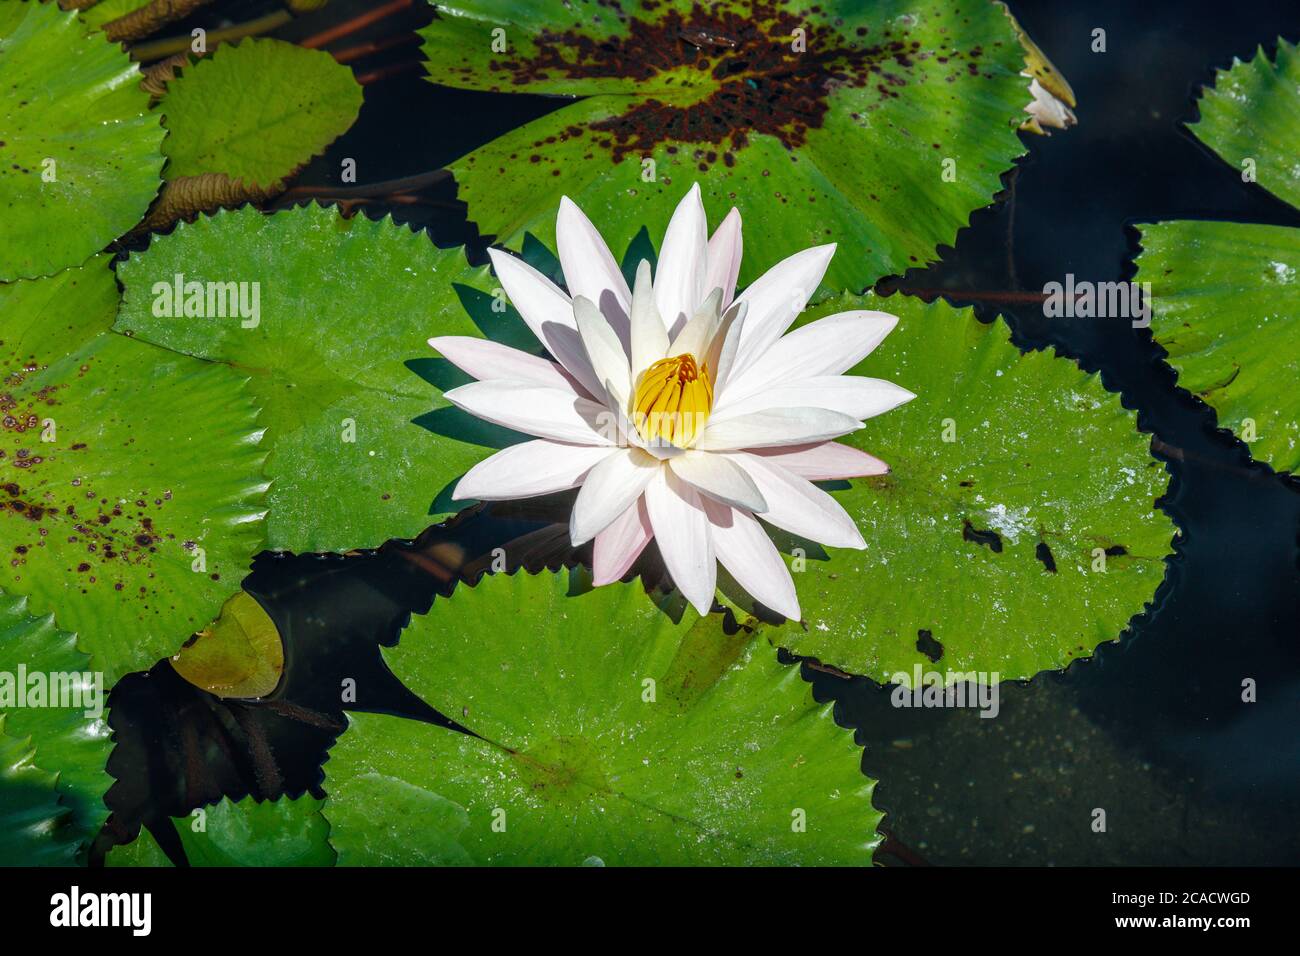 Blooming white Water Lilly (Nymphaea) in a pond in Candidasa, Karangasem, Bali, Indonesia. Stock Photo